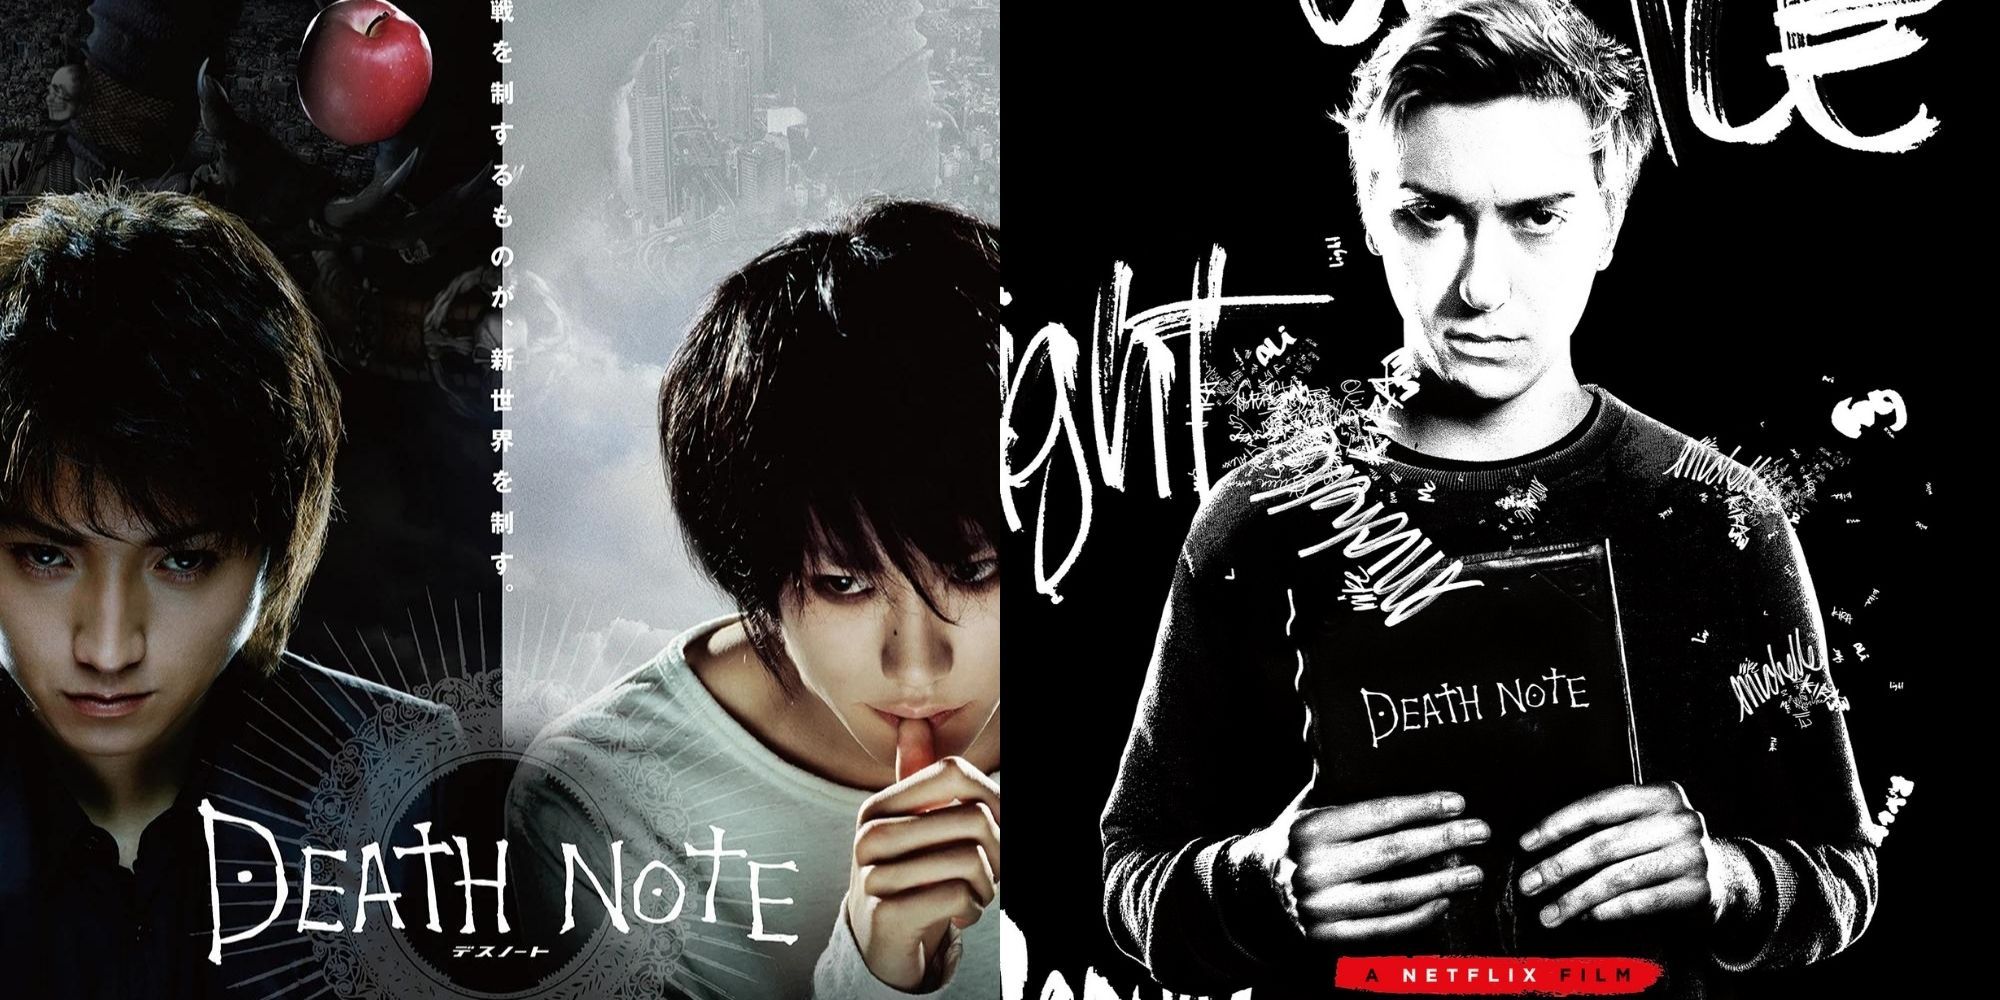 Death-Note (2006) and (2017)